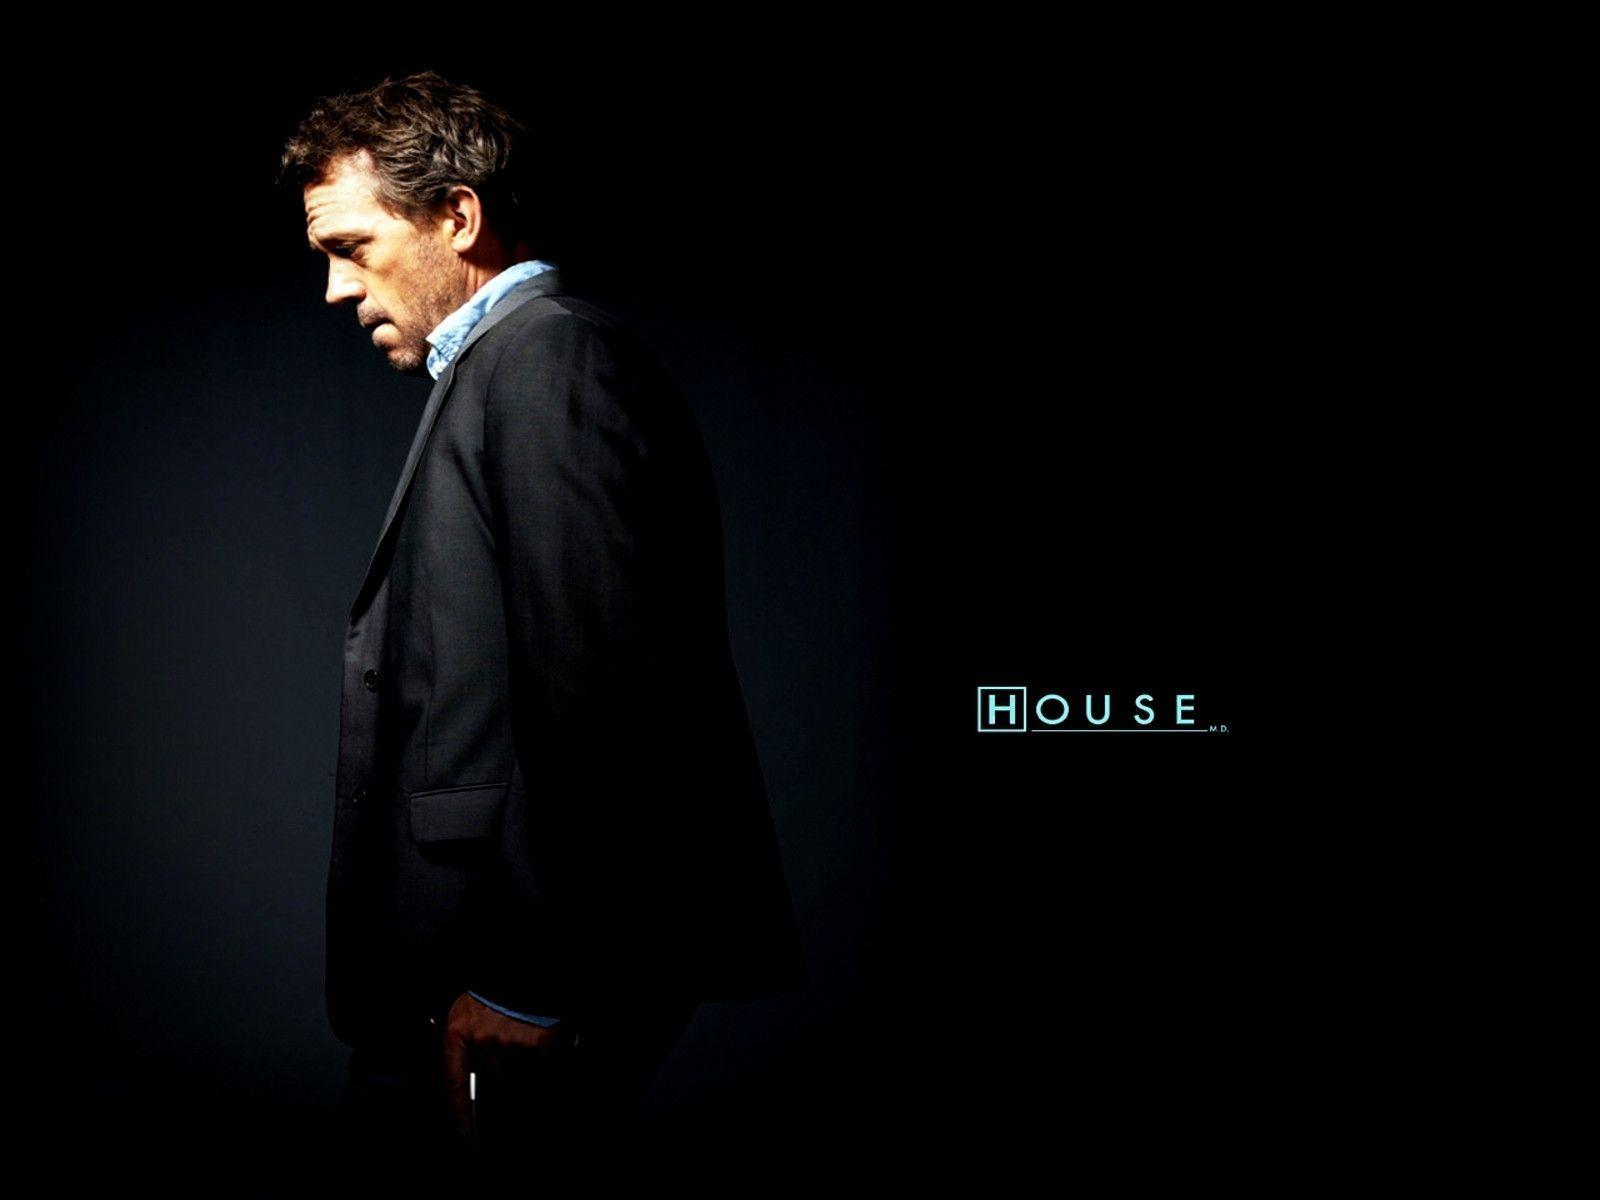 House MD Wallpaper 1600x1200